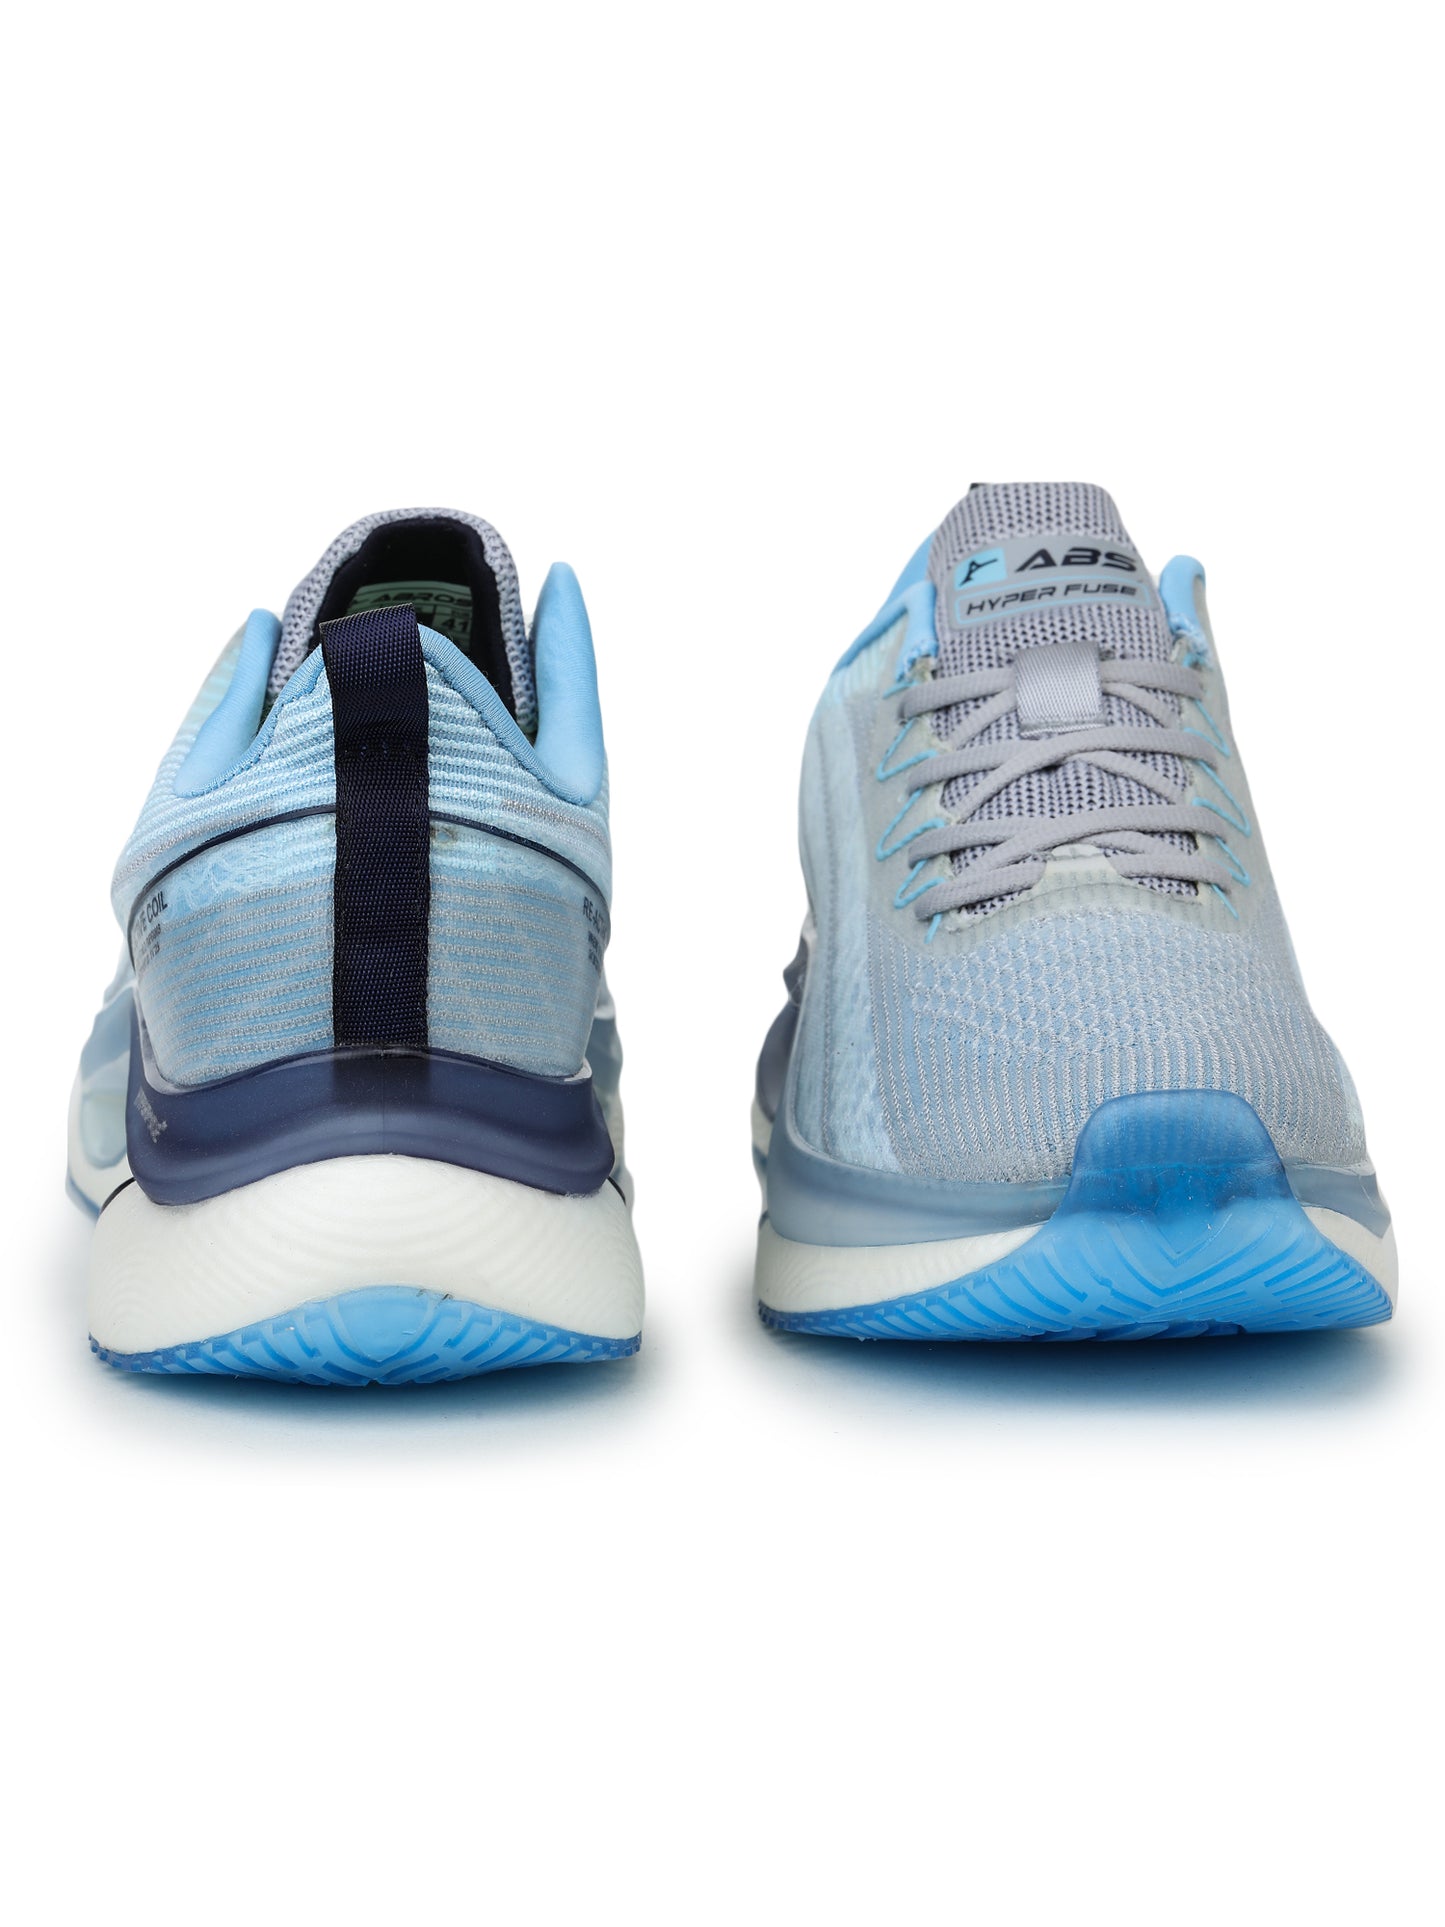 ABROS SPRINT Sports shoes For Men's